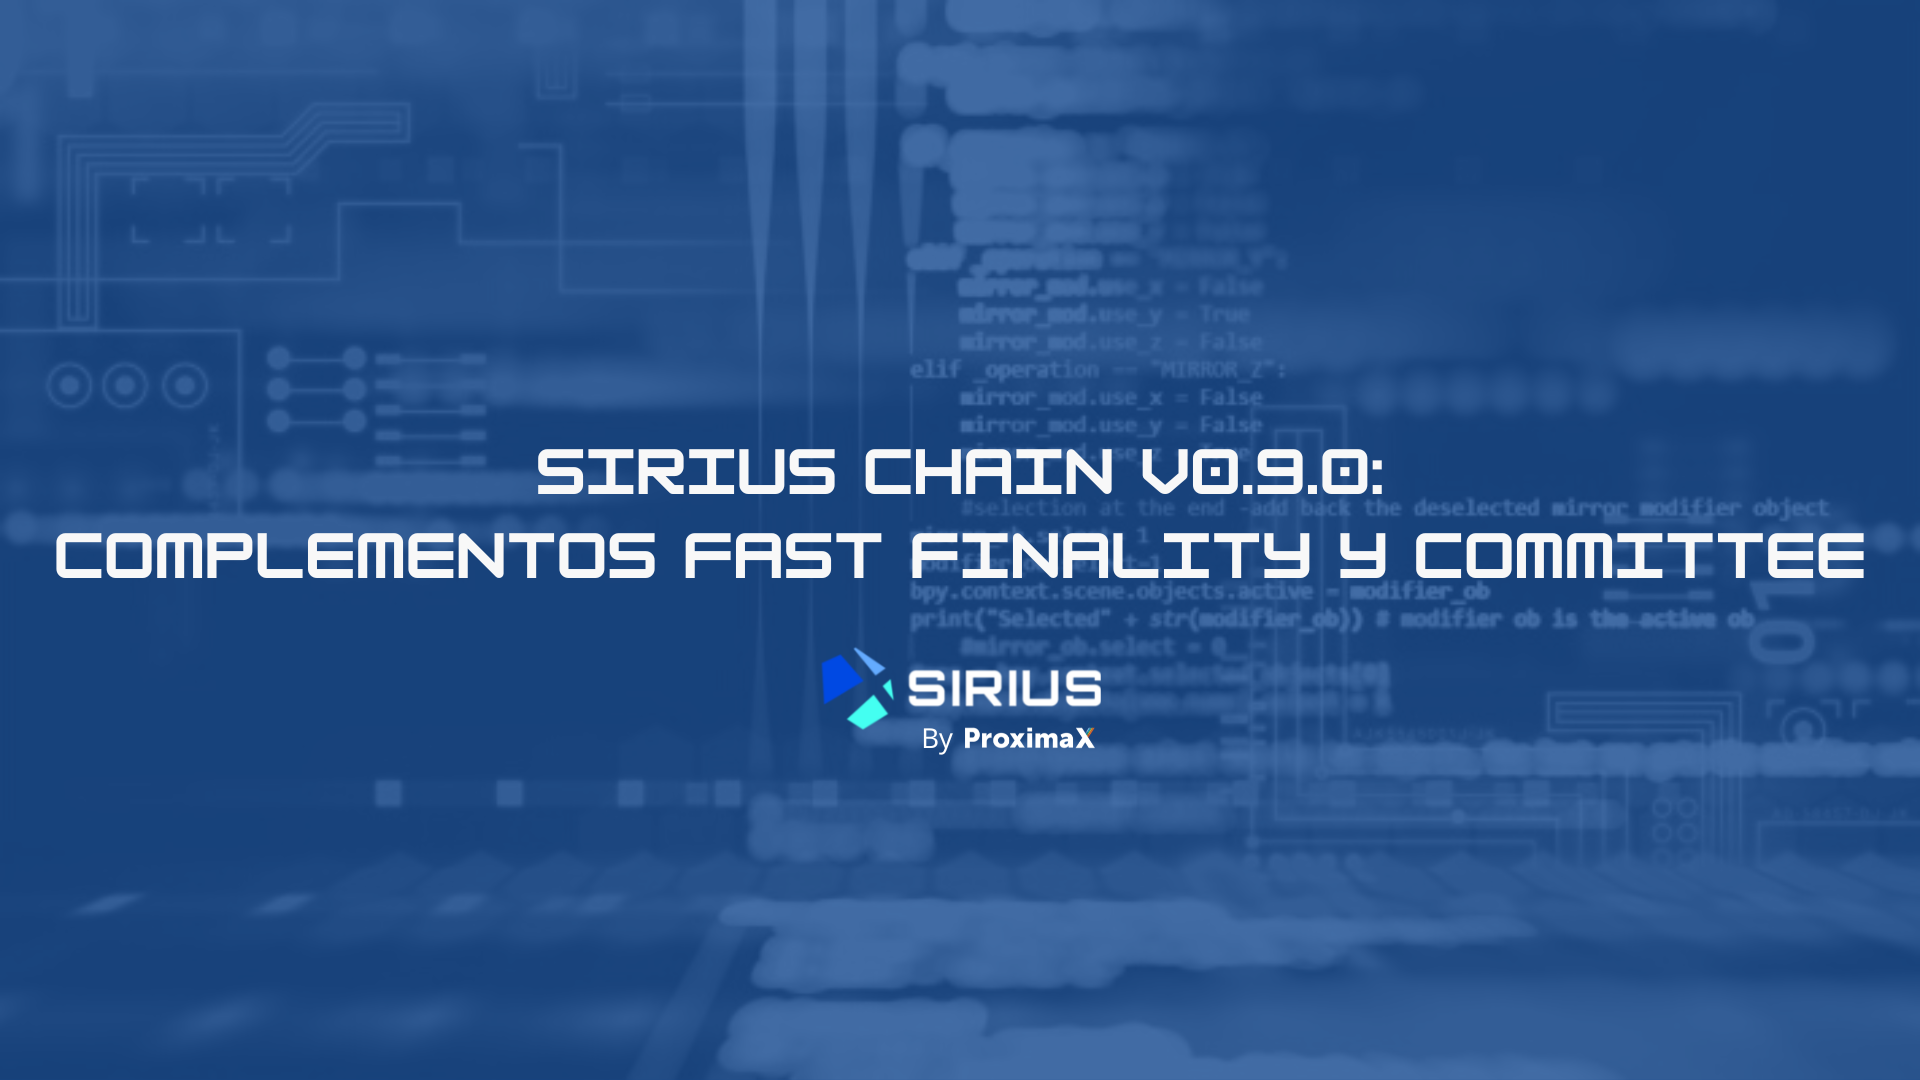 Sirius Chain v0.9.0: Complementos Fast Finality y Committee